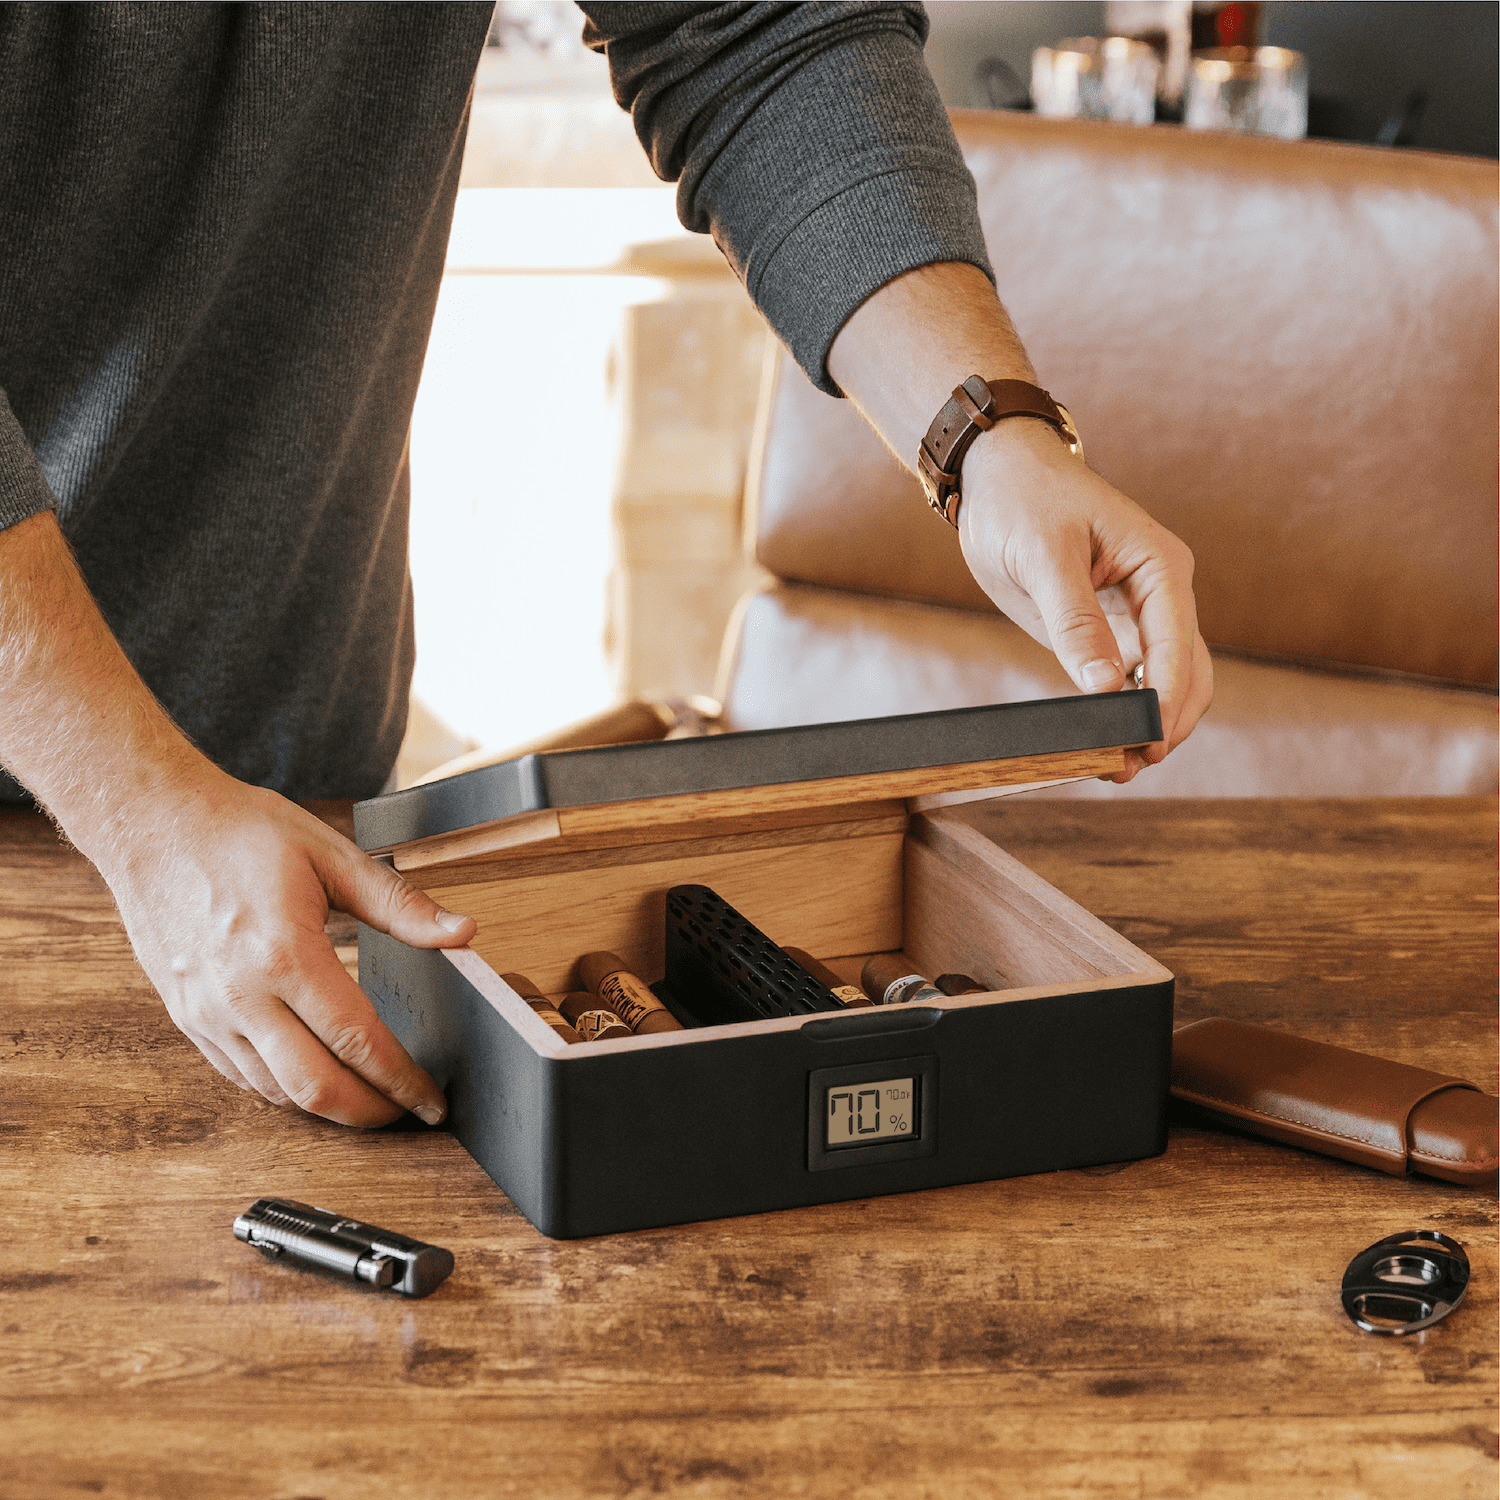 Top 10 Best Cabinet Humidors - Buyer's Guide & Reviews – Humidor